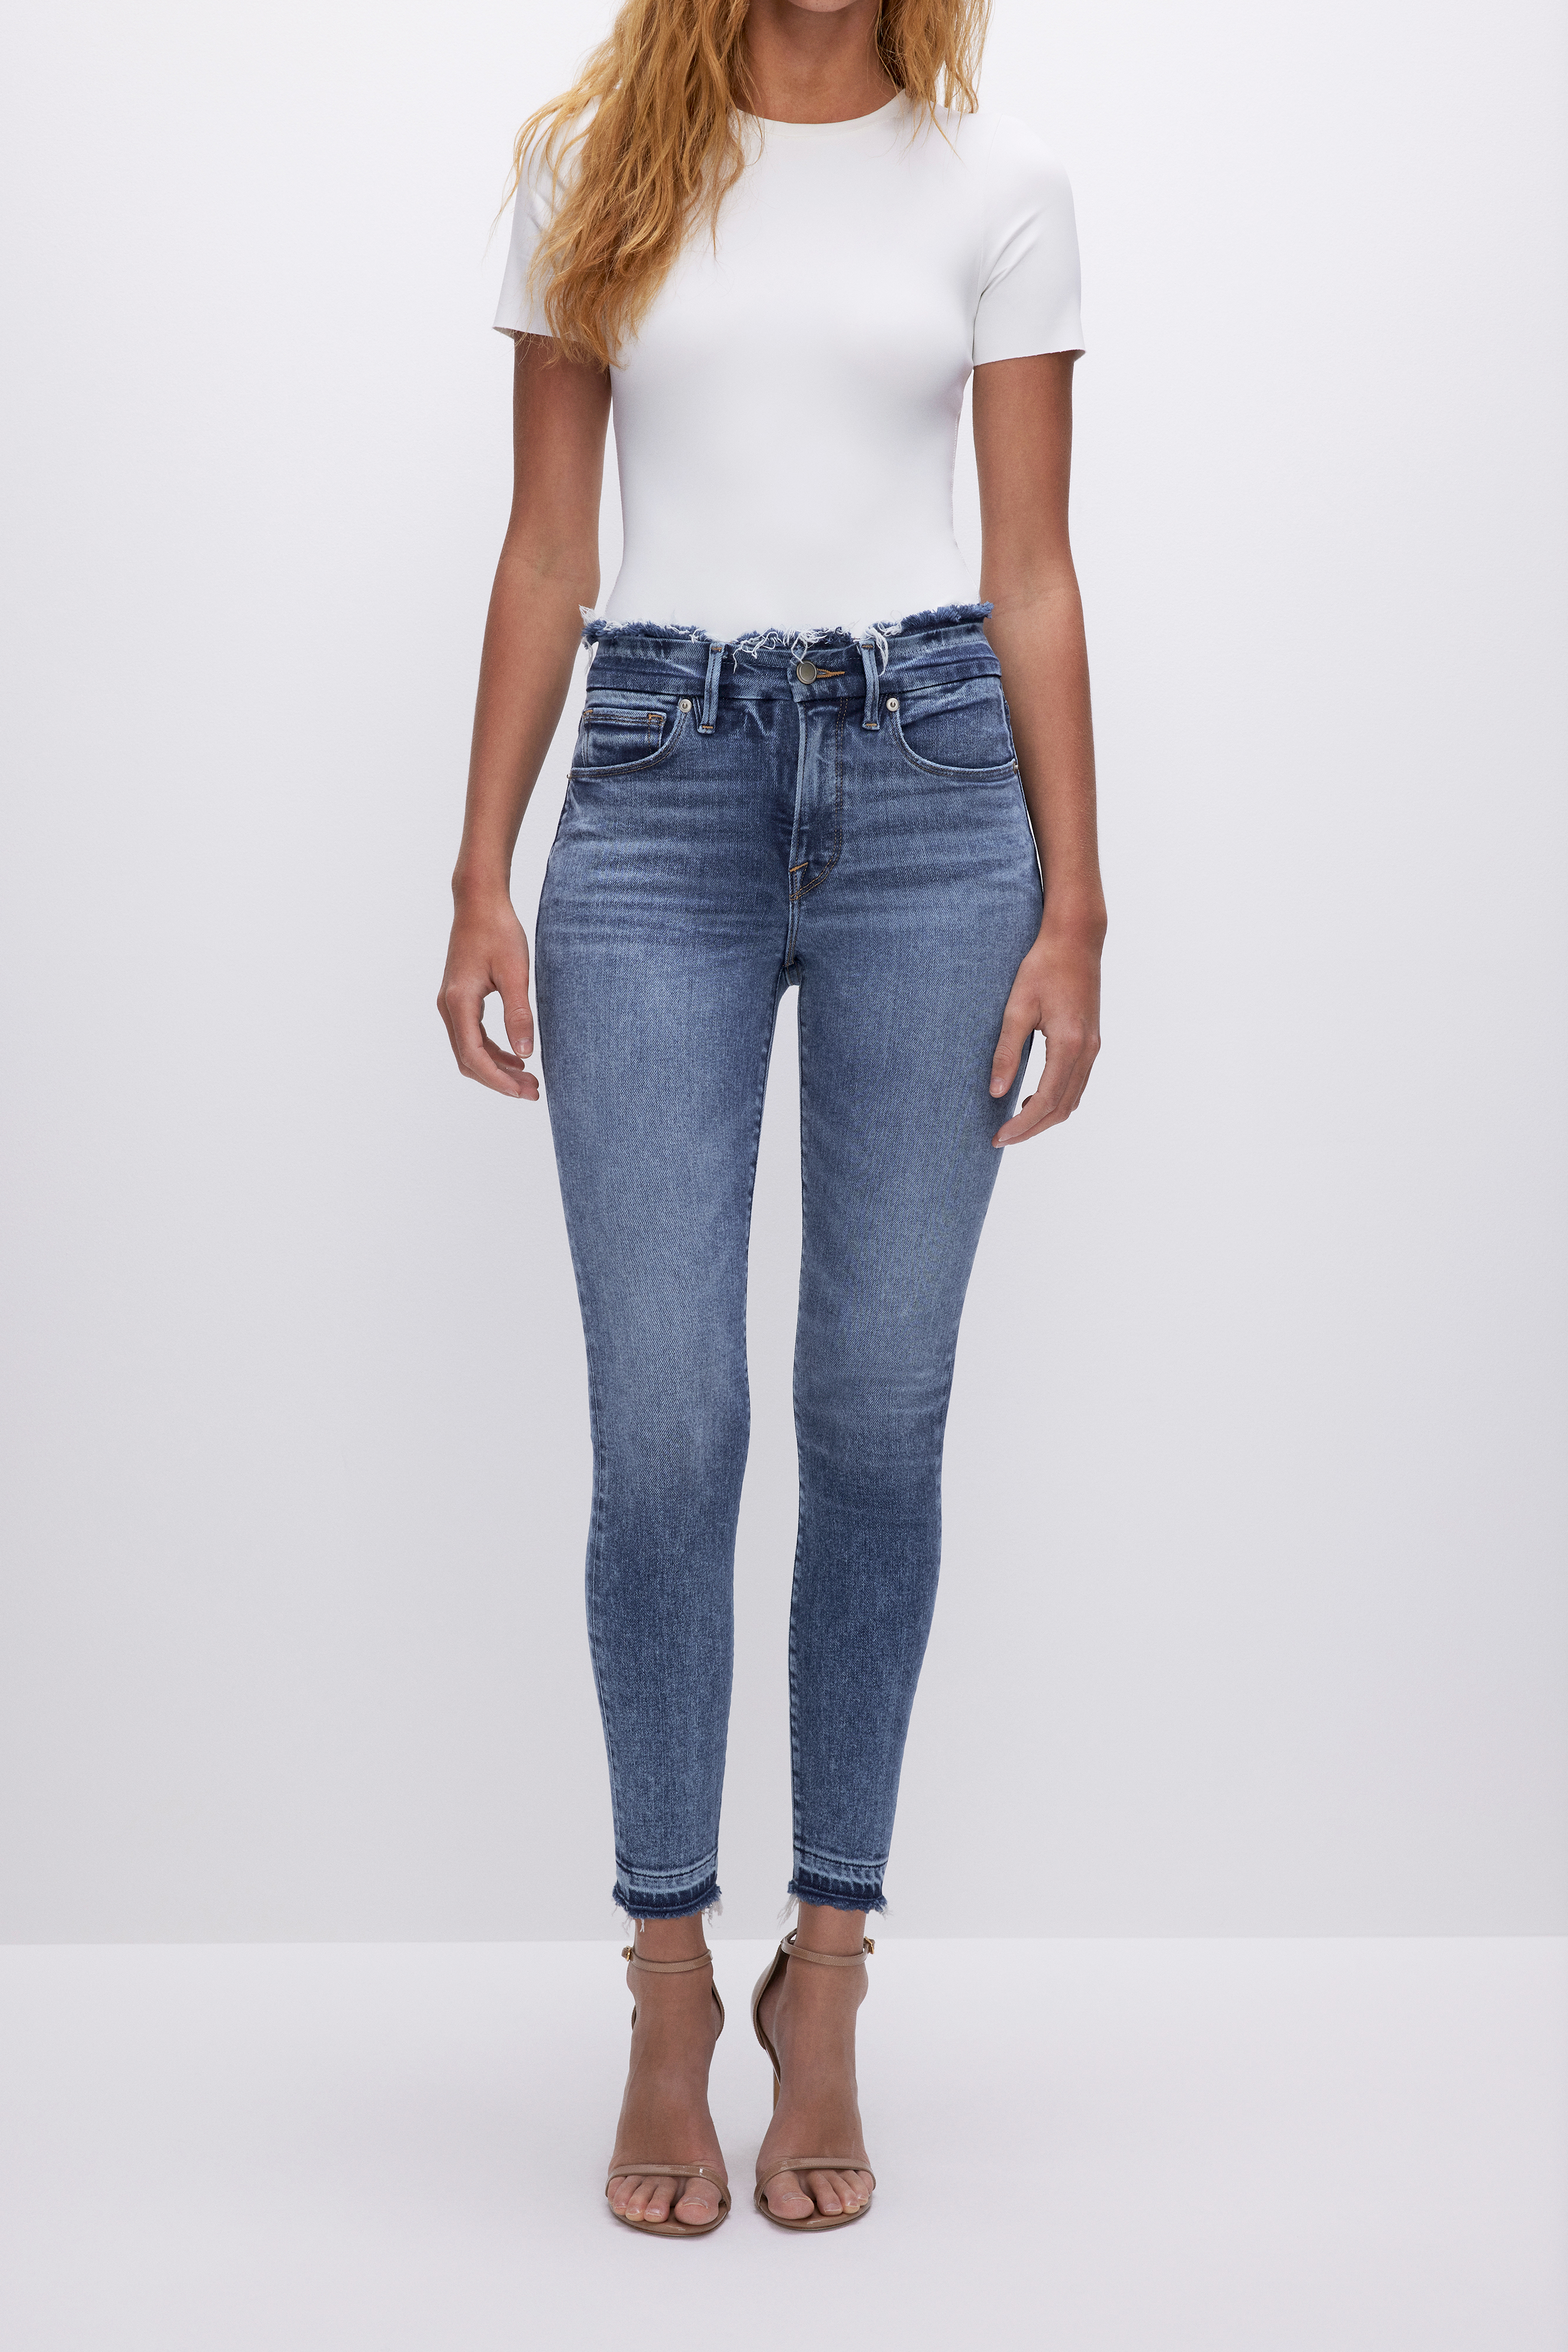 Styled with GOOD LEGS CROPPED SKINNY JEANS | INDIGO452